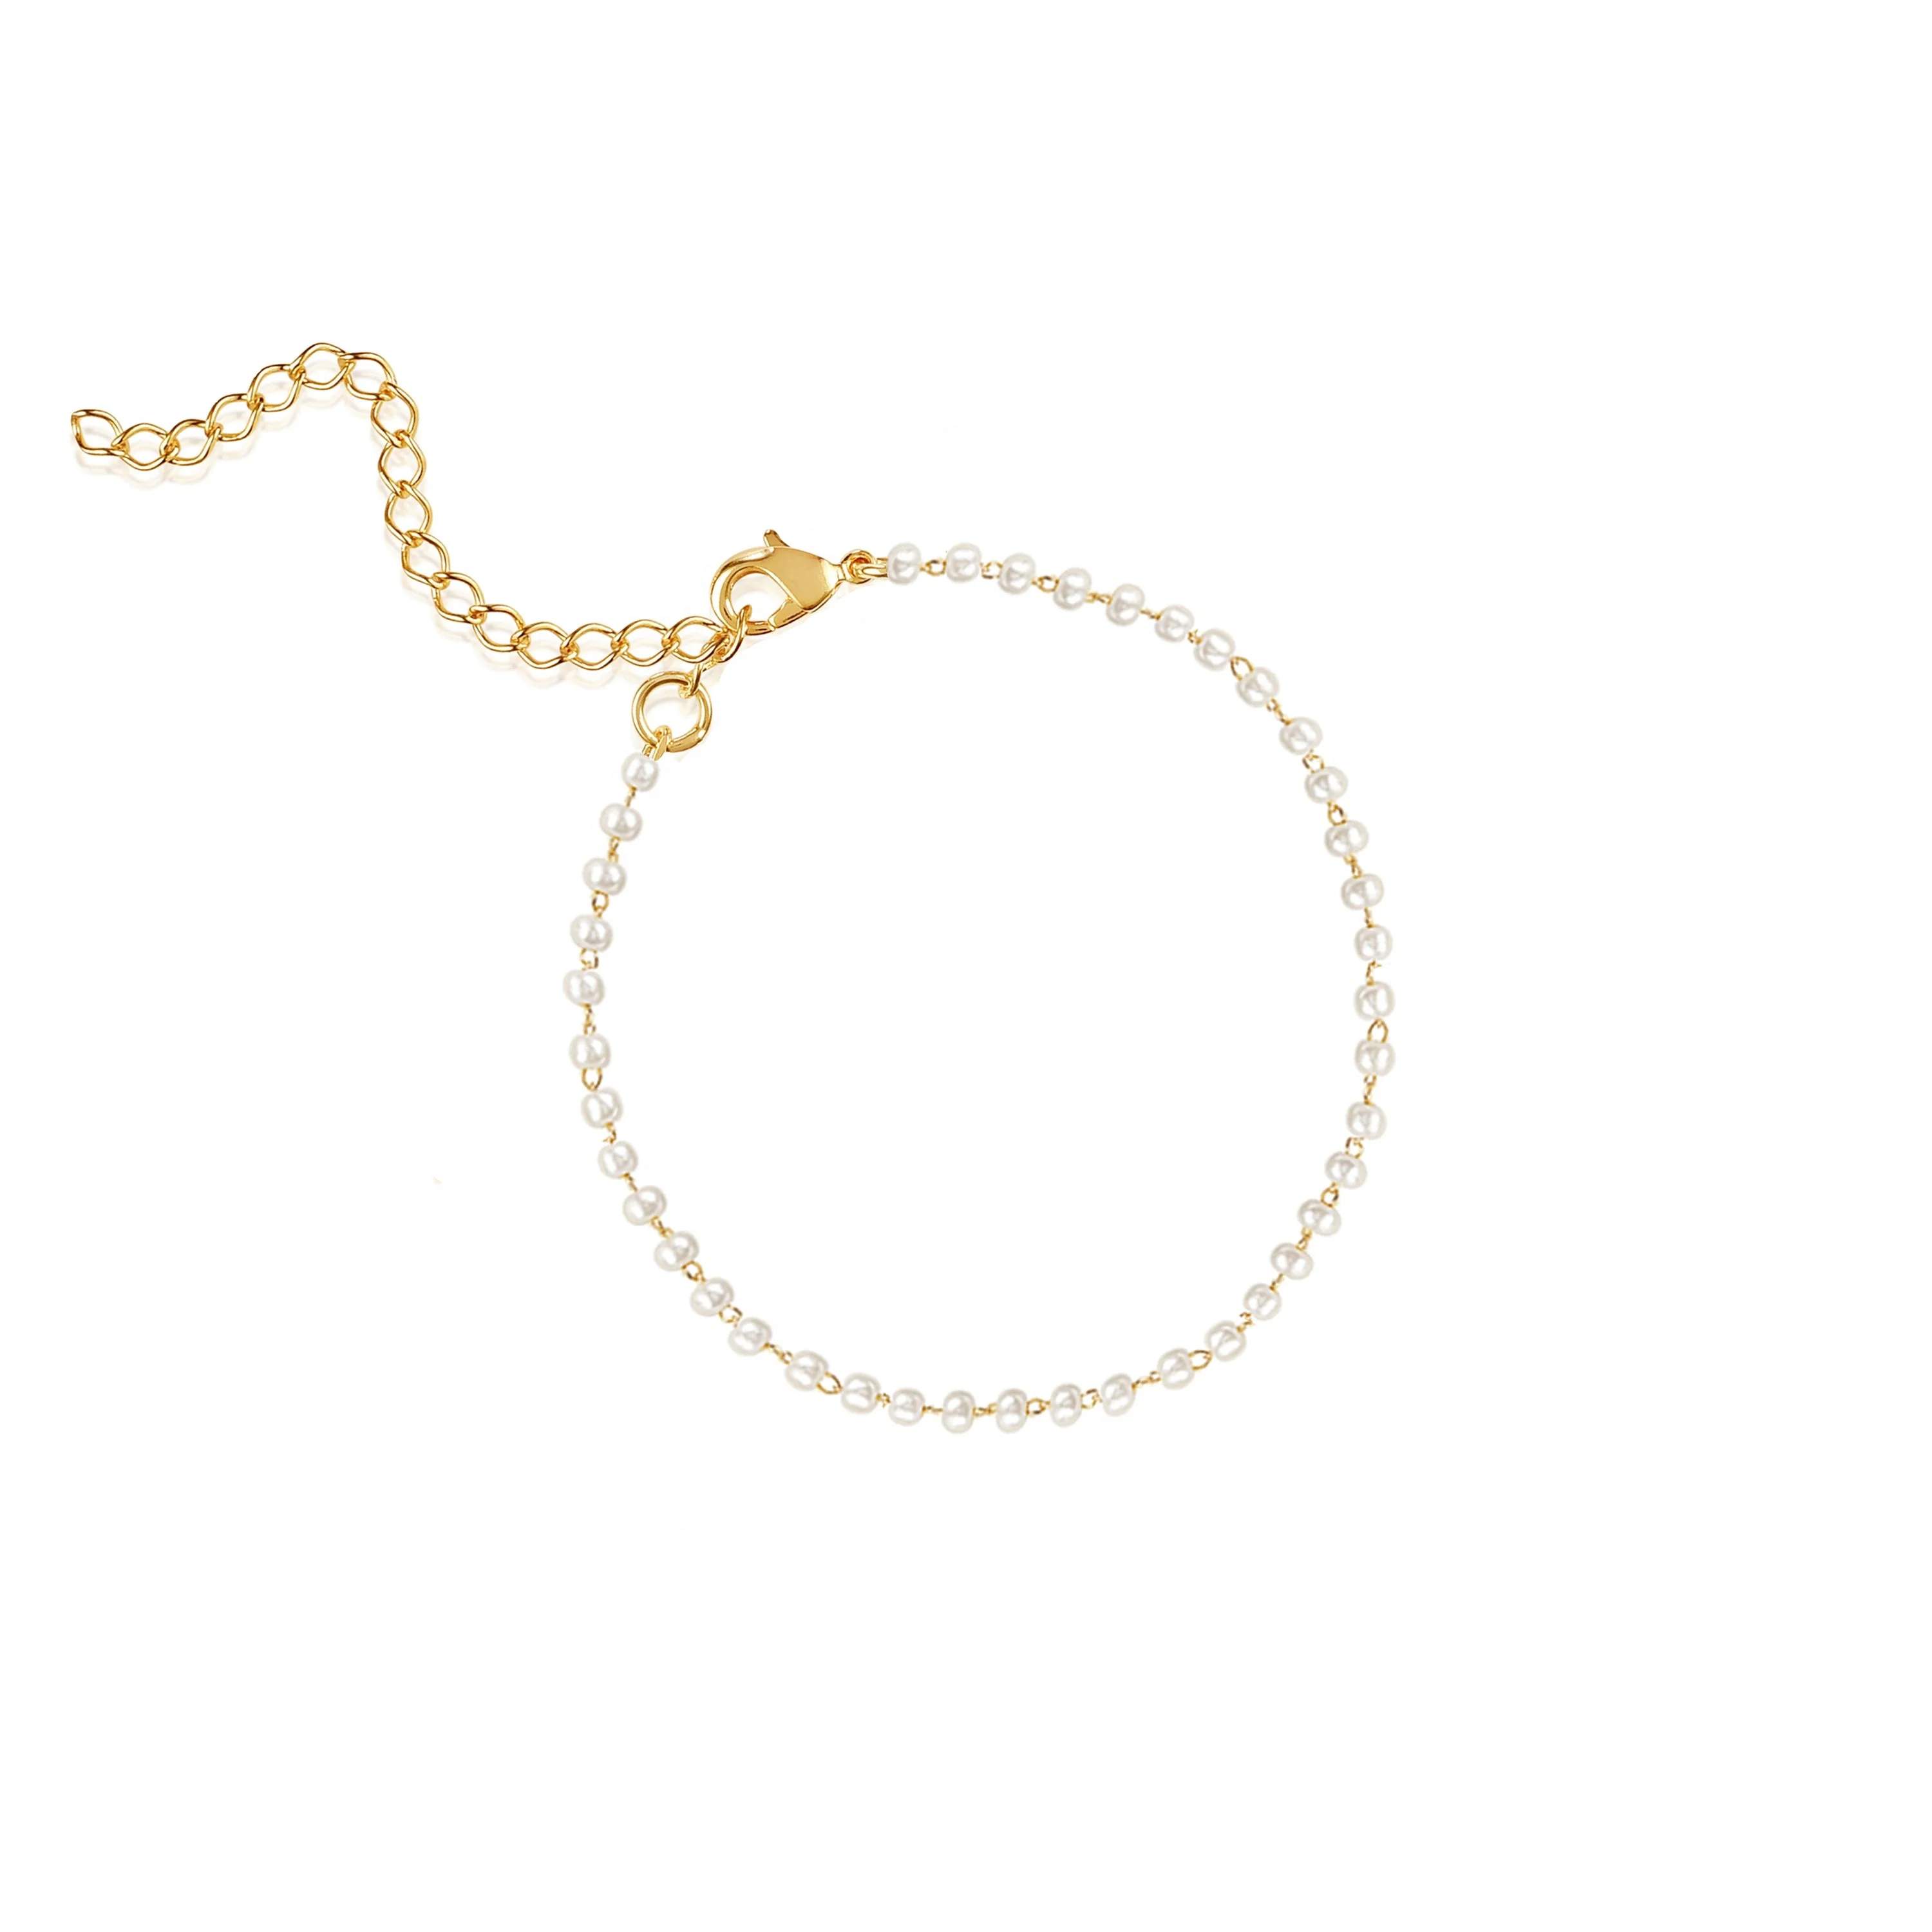 

Yadoo Vermeil Jewelry Fashion Design 925 Sterling Silver 18k Gold Plated Women Delicate Pearl High Quality Chain Bracelet, Vermeil,silver,rose gold